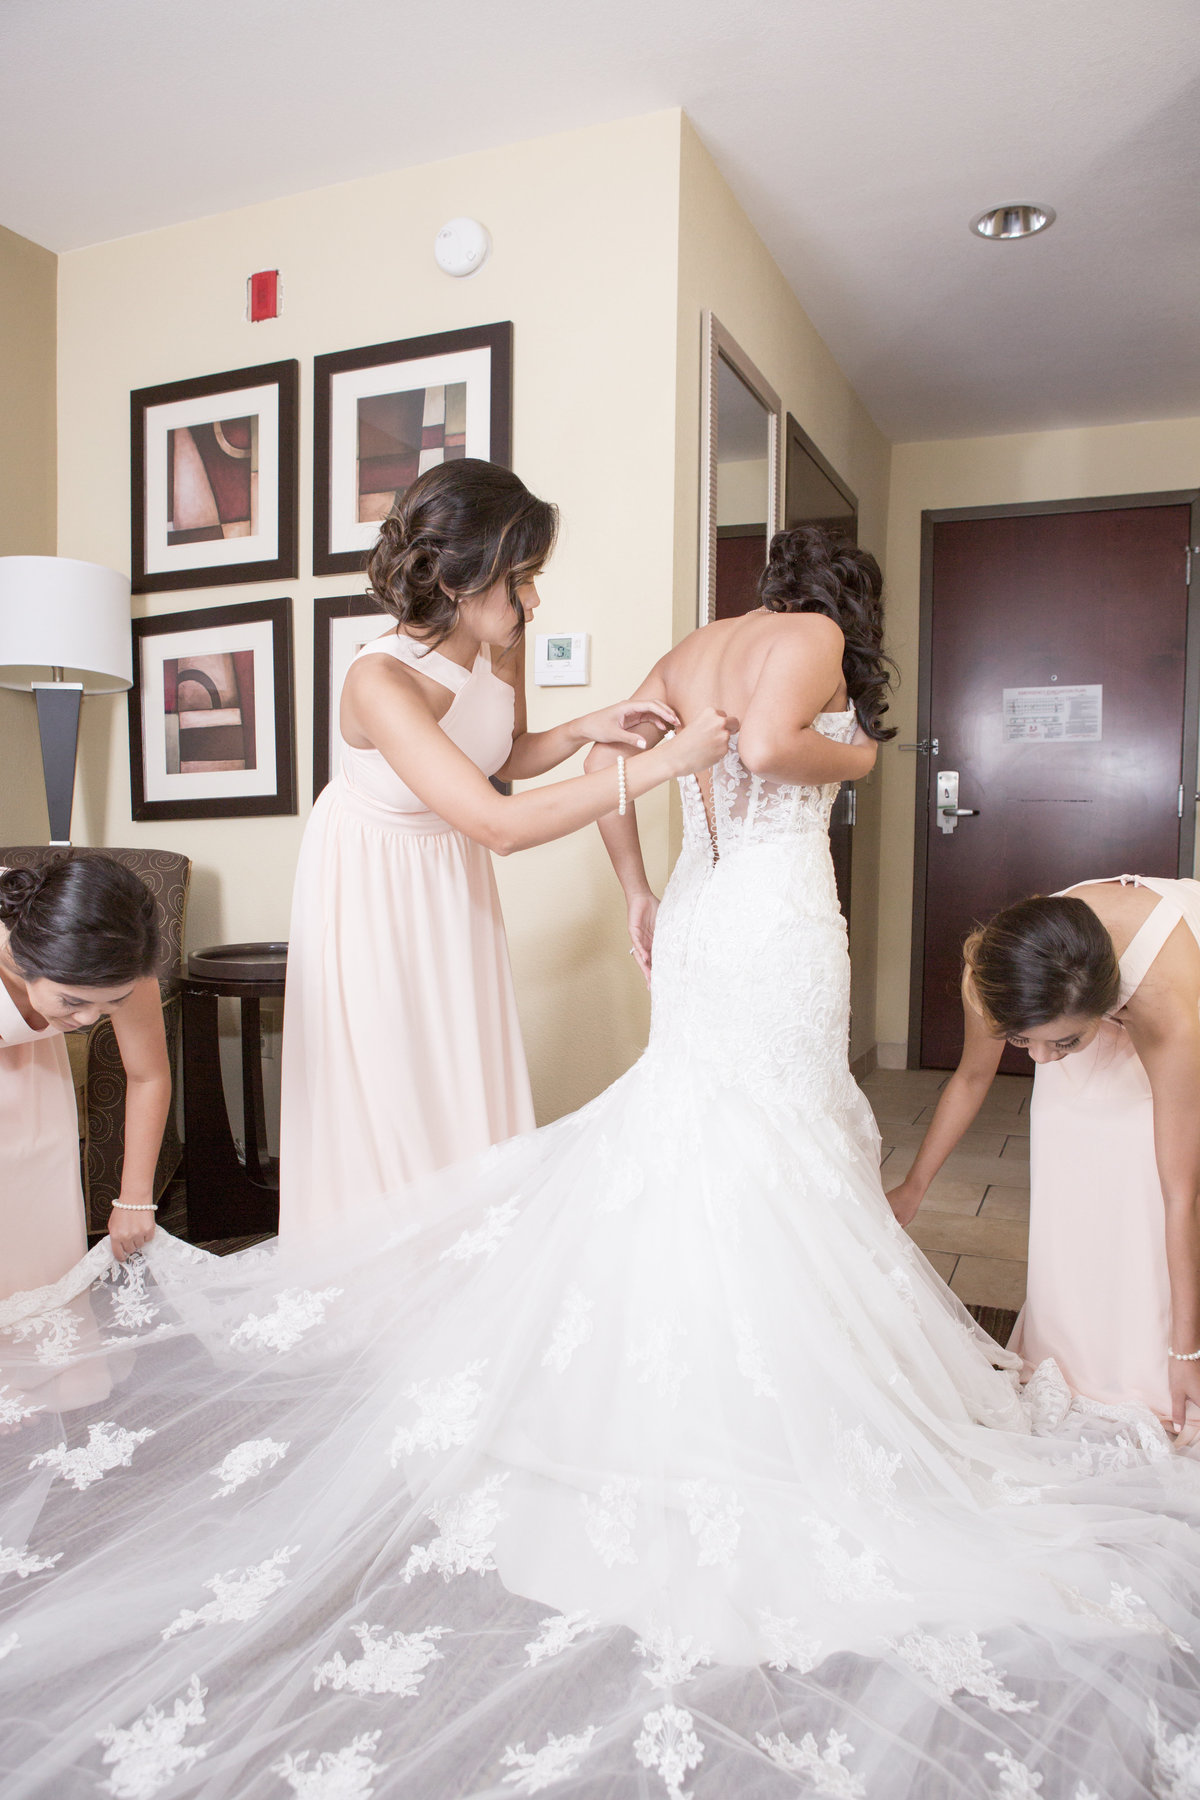 The bride gets ready for her wedding day with the help of her bridesmaids.